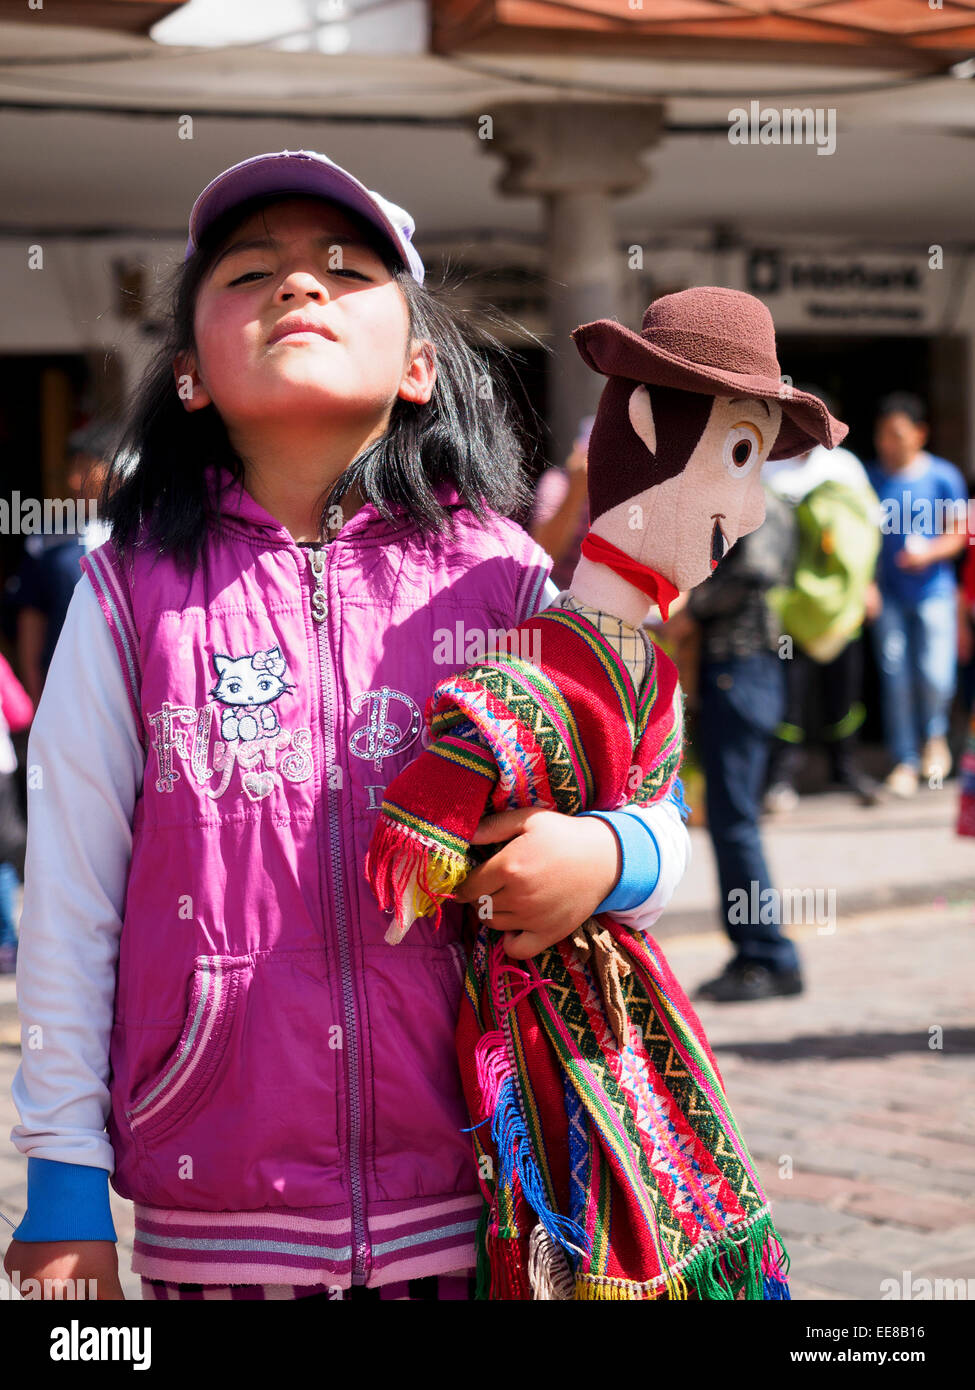 Local girl with a puppet in the Cusco Week festivites, held each year in June leading up to the Inti Raymi festival - Cusco, Peru Stock Photo